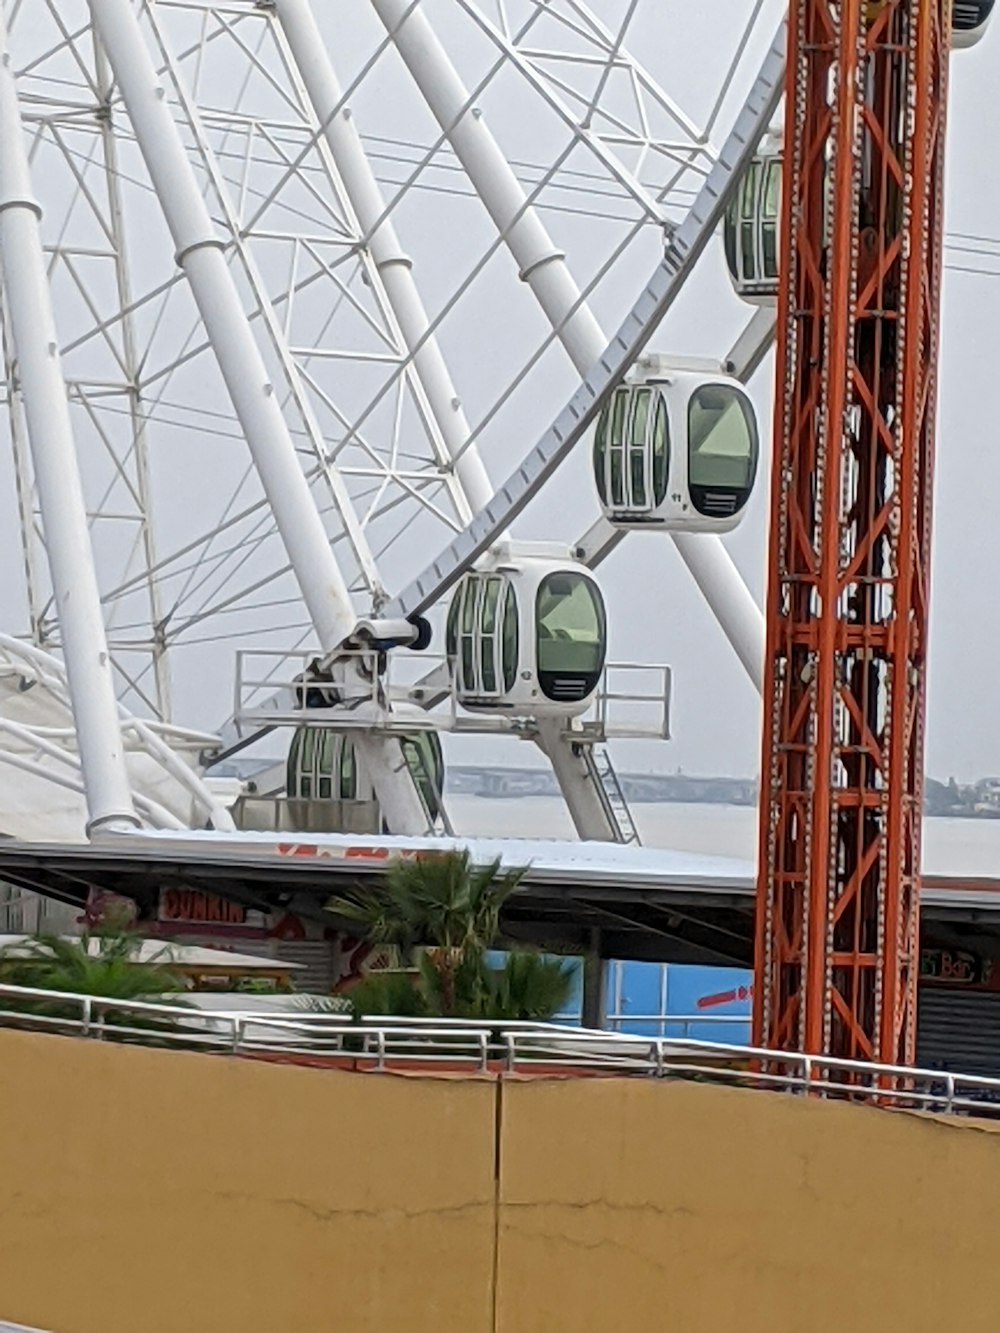 a large ferris wheel sitting next to a building